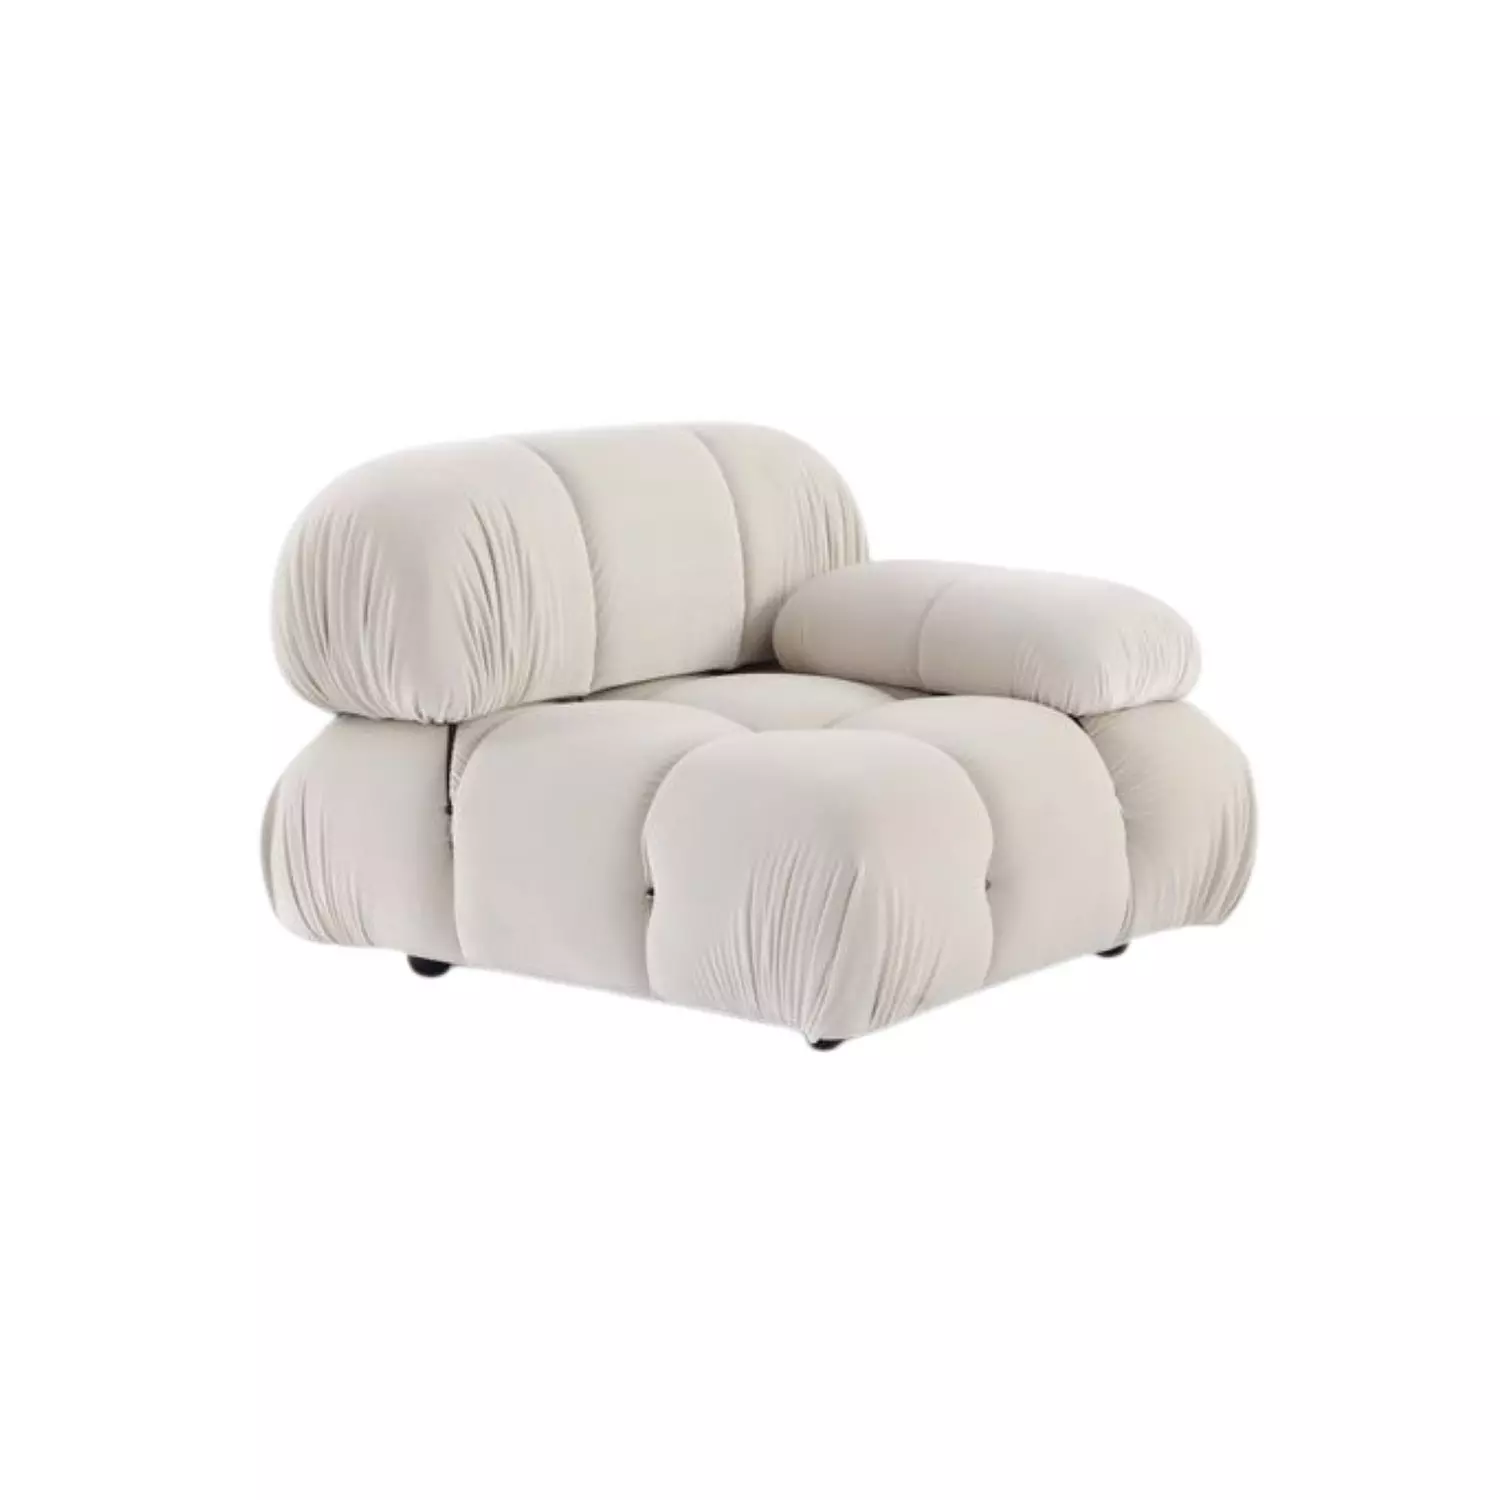 TOUGHTED CORNER SOFA  hover image